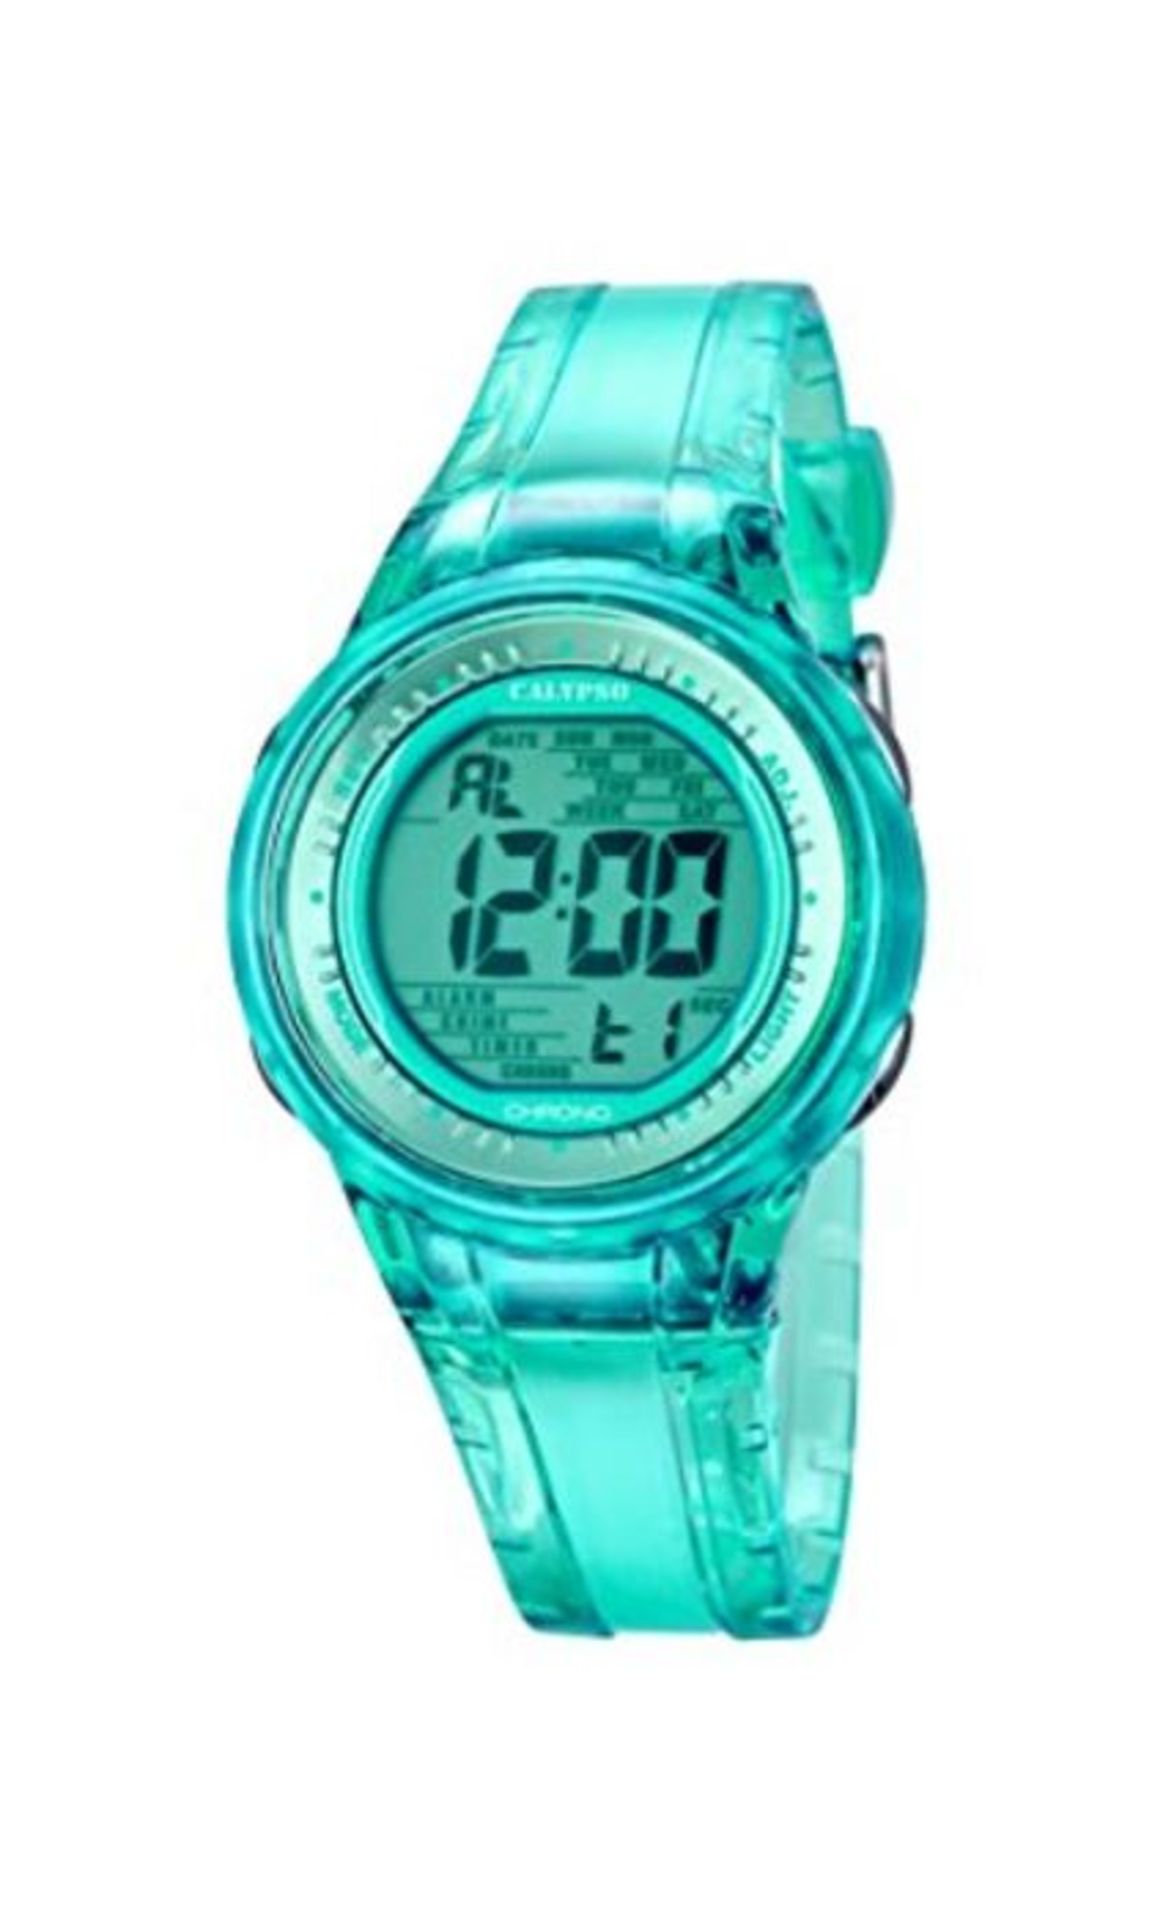 Calypso Women's Digital Watch with Turquoise Dial Digital Display and Turquoise Plasti